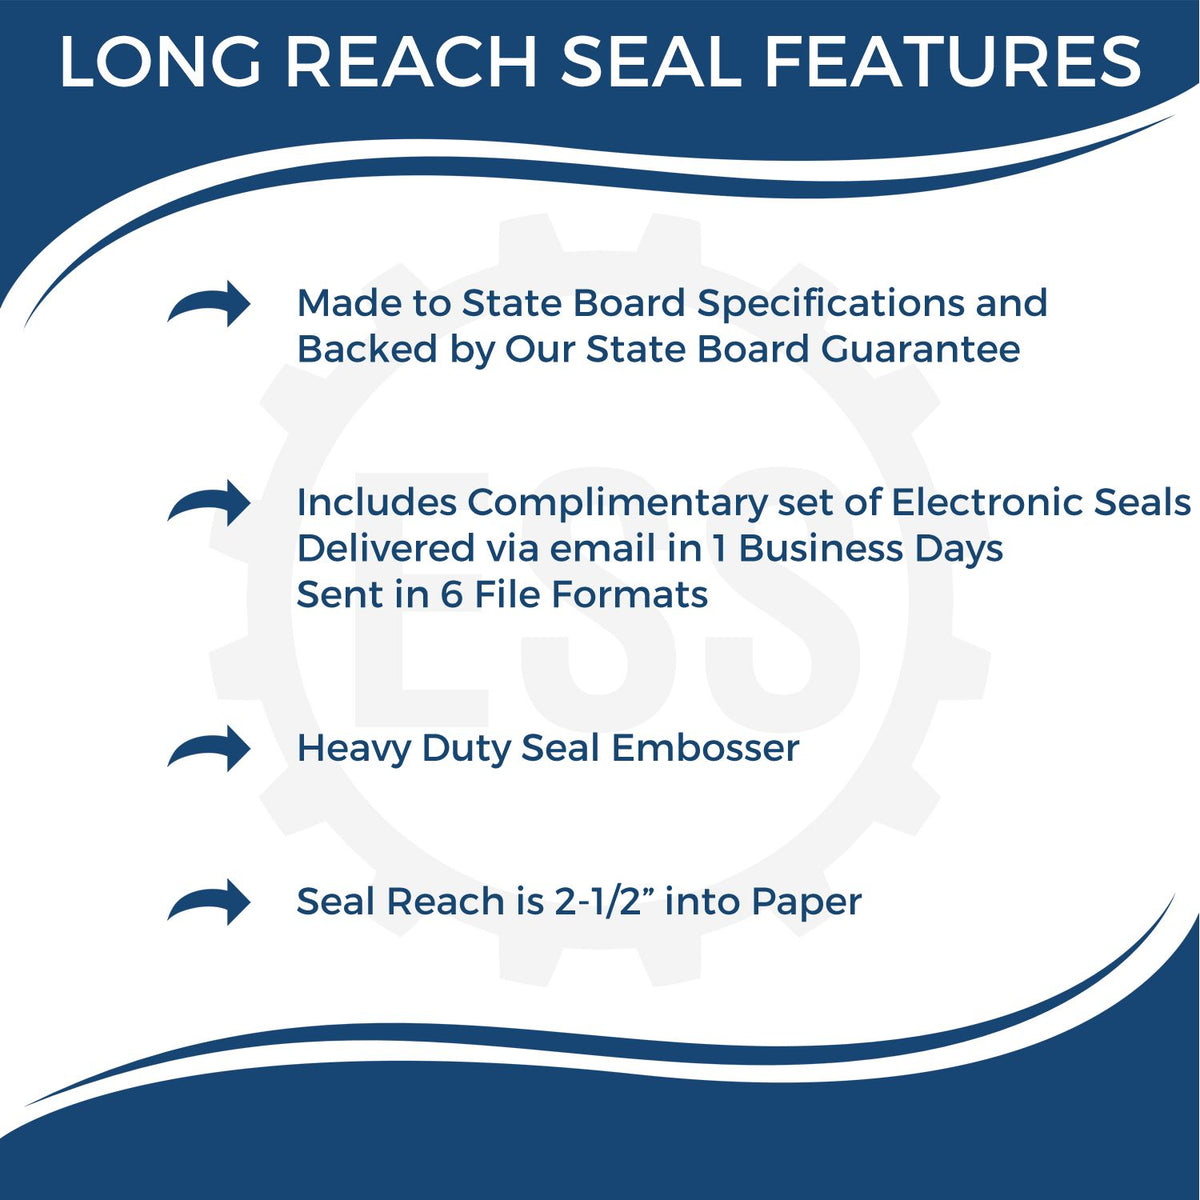 A picture of an infographic highlighting the selling points for the Long Reach Wyoming Geology Seal